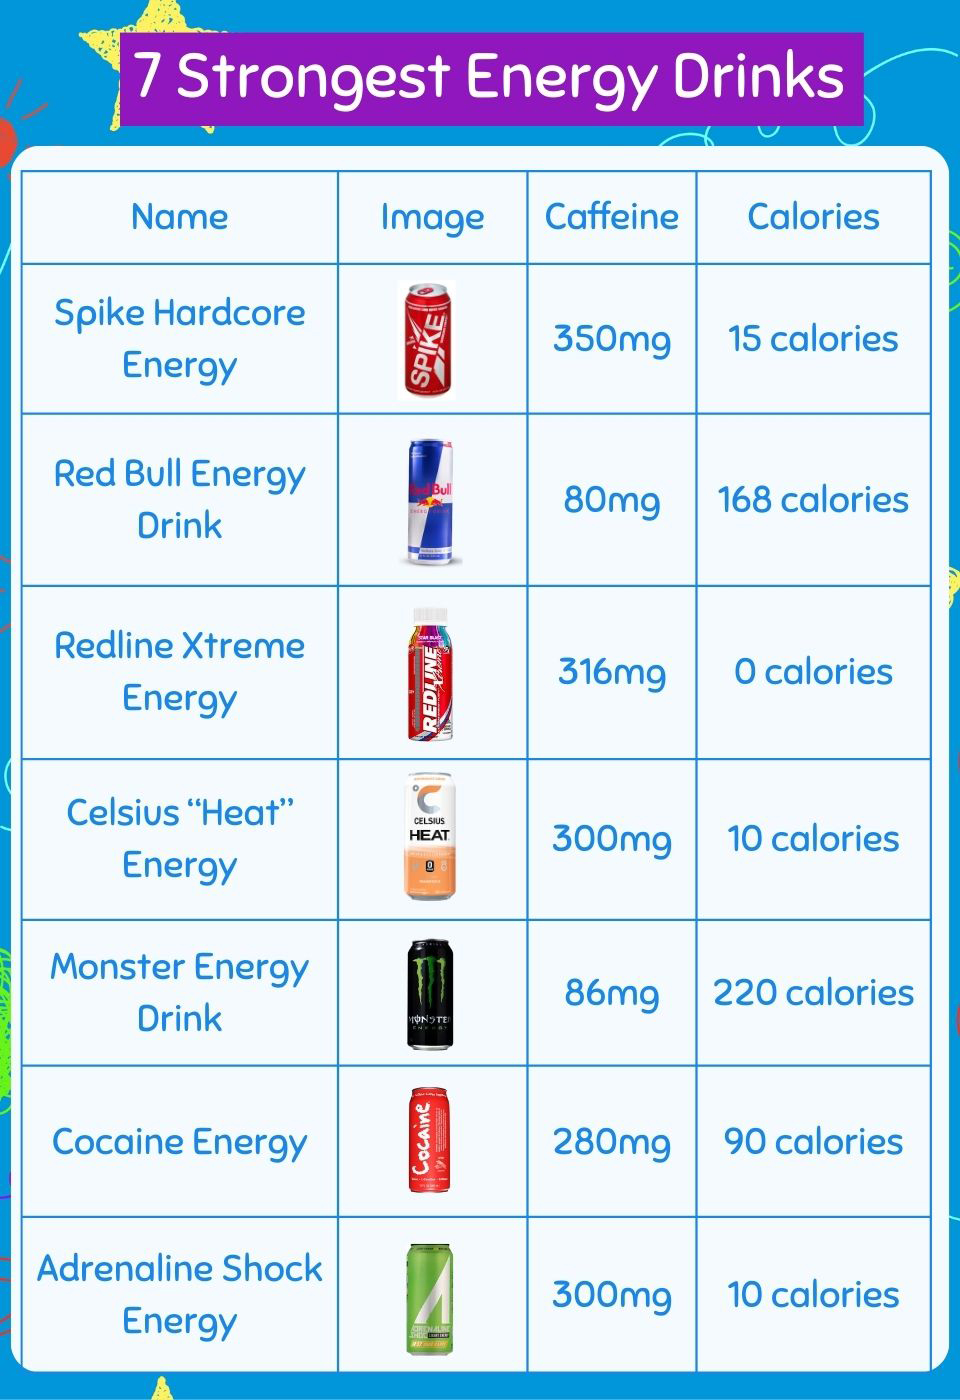 What energy drink works the best?